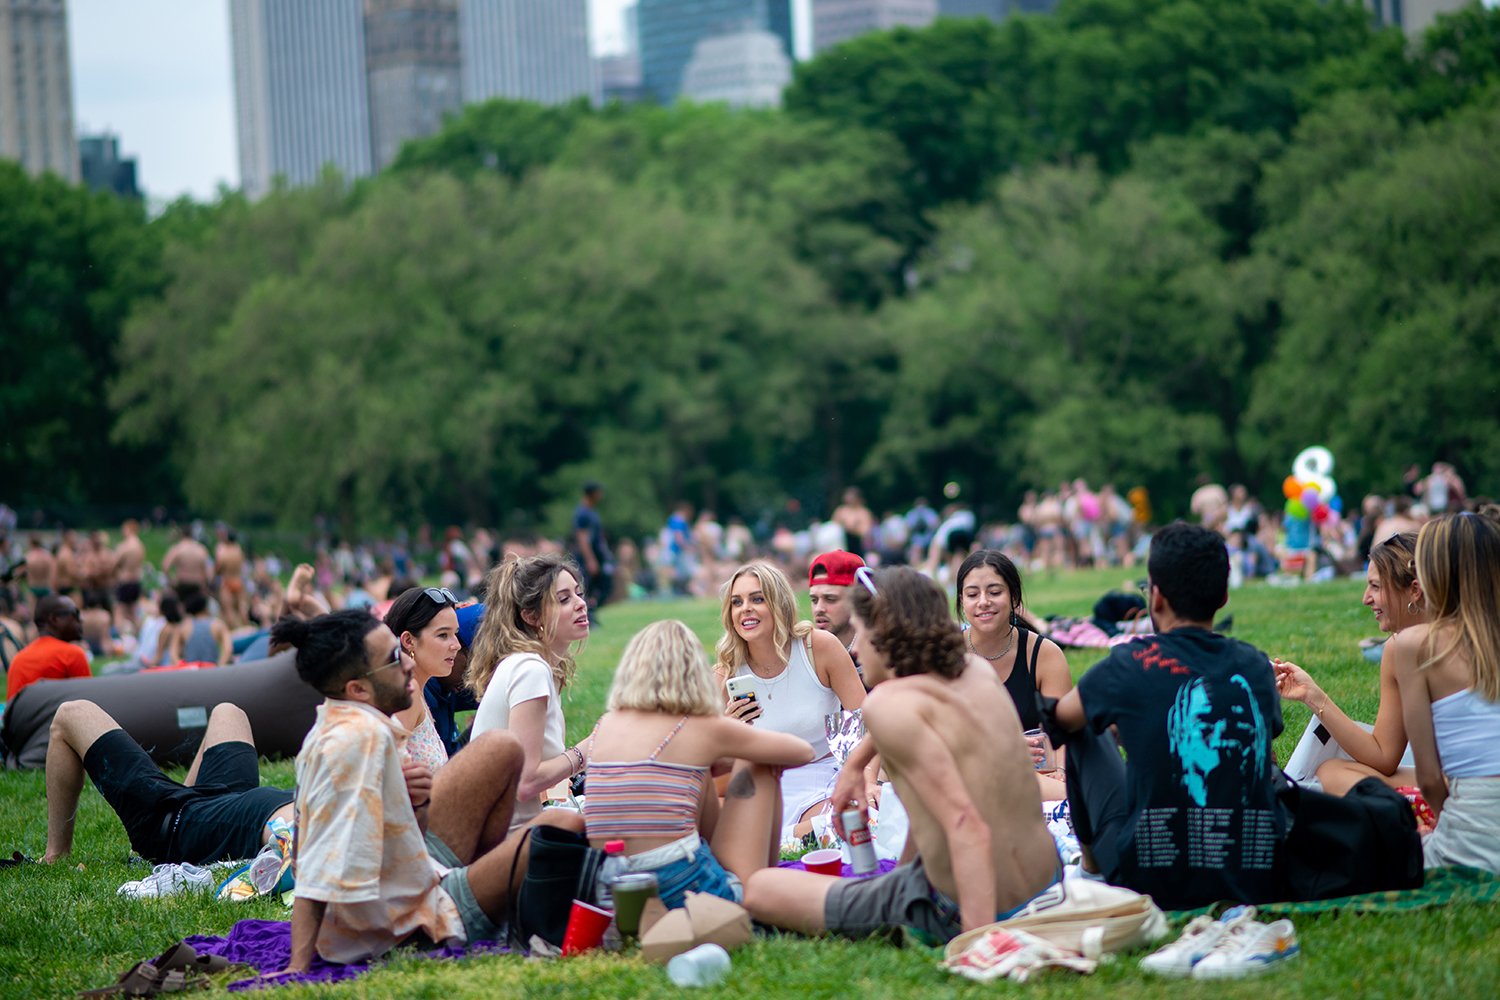 Groups of people gather together at Sheep Meadow in Central Park in May 2021